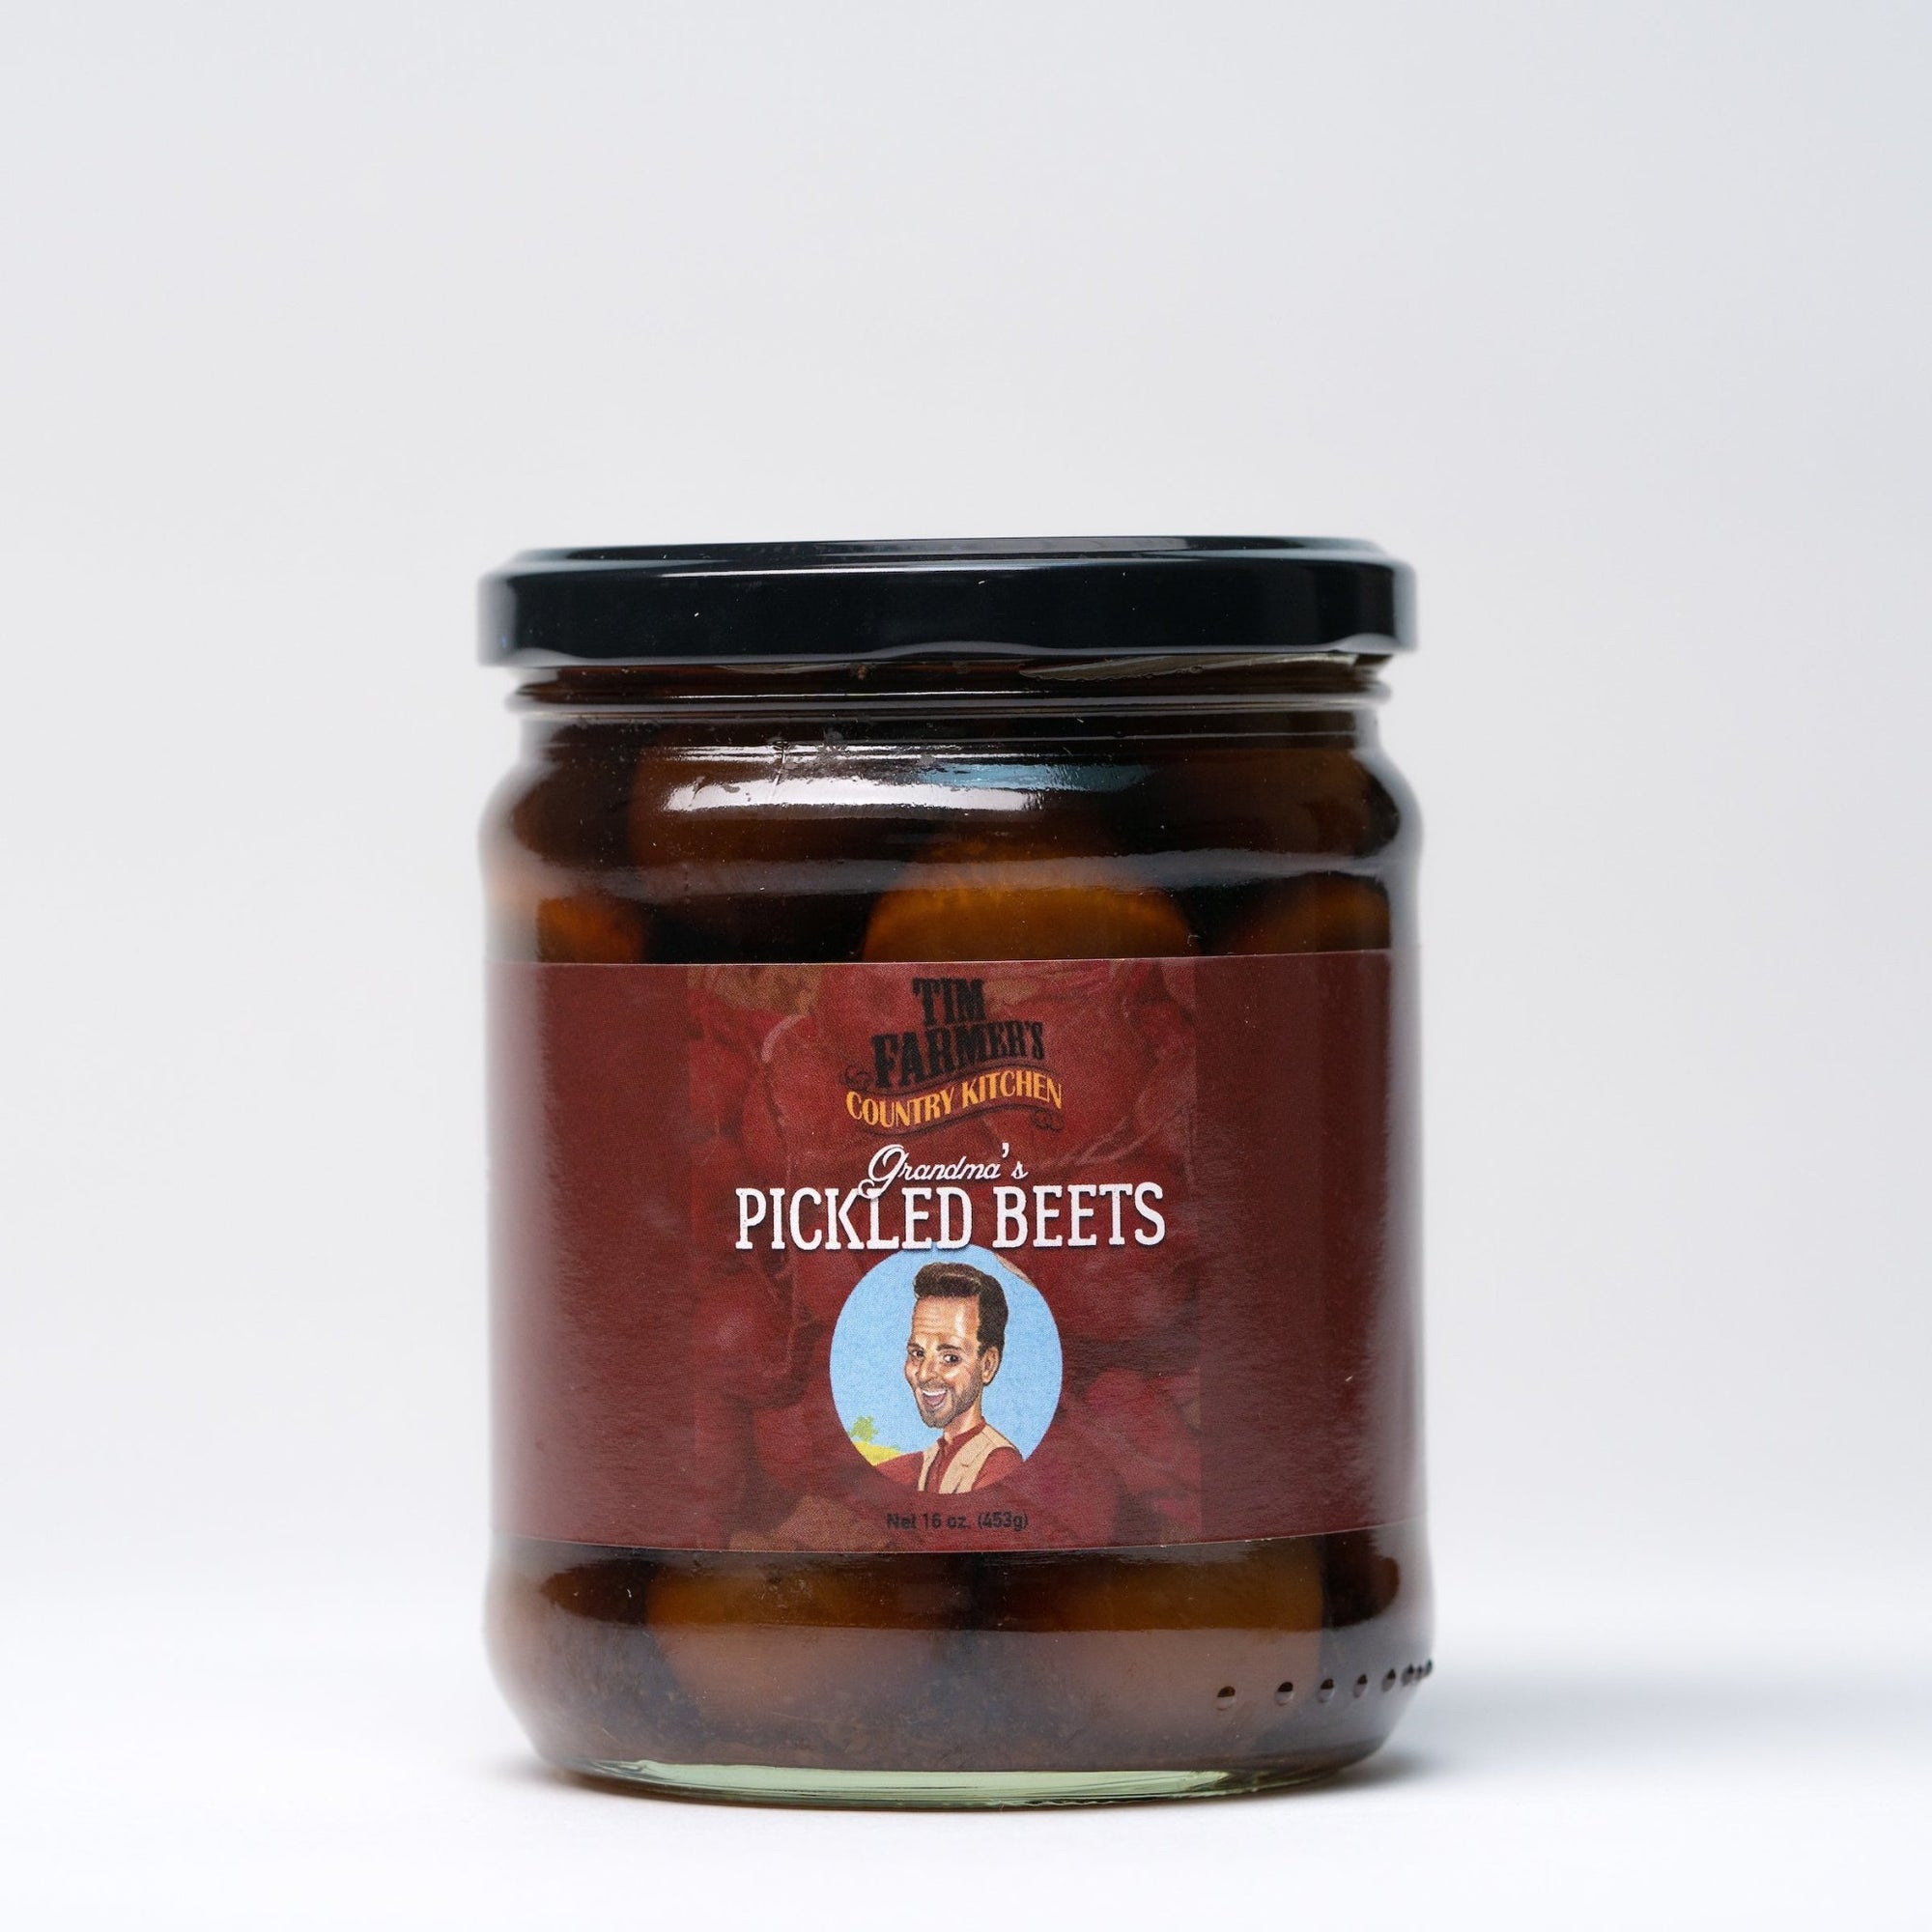 Tim Farmer Grandma's Pickled Beets - Kentucky Soaps & Such